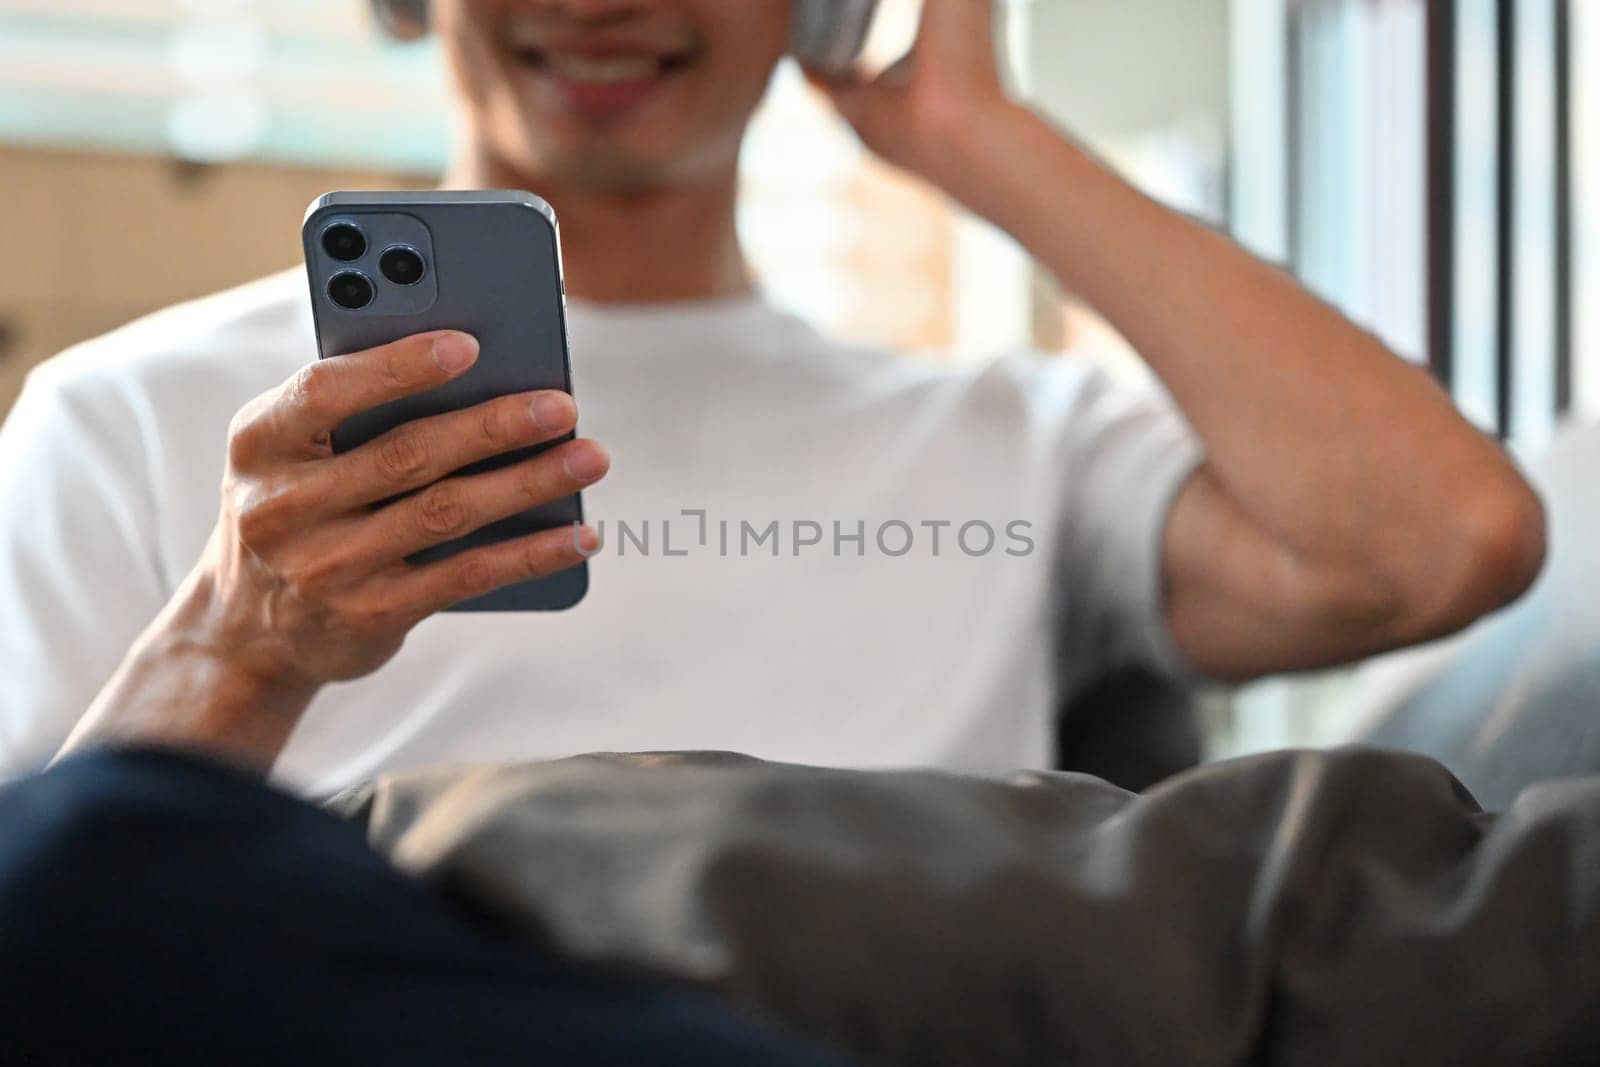 Selective focus on hand. Smiling man using smart phone and relaxing on couch. People, Technology and lifestyle concept.